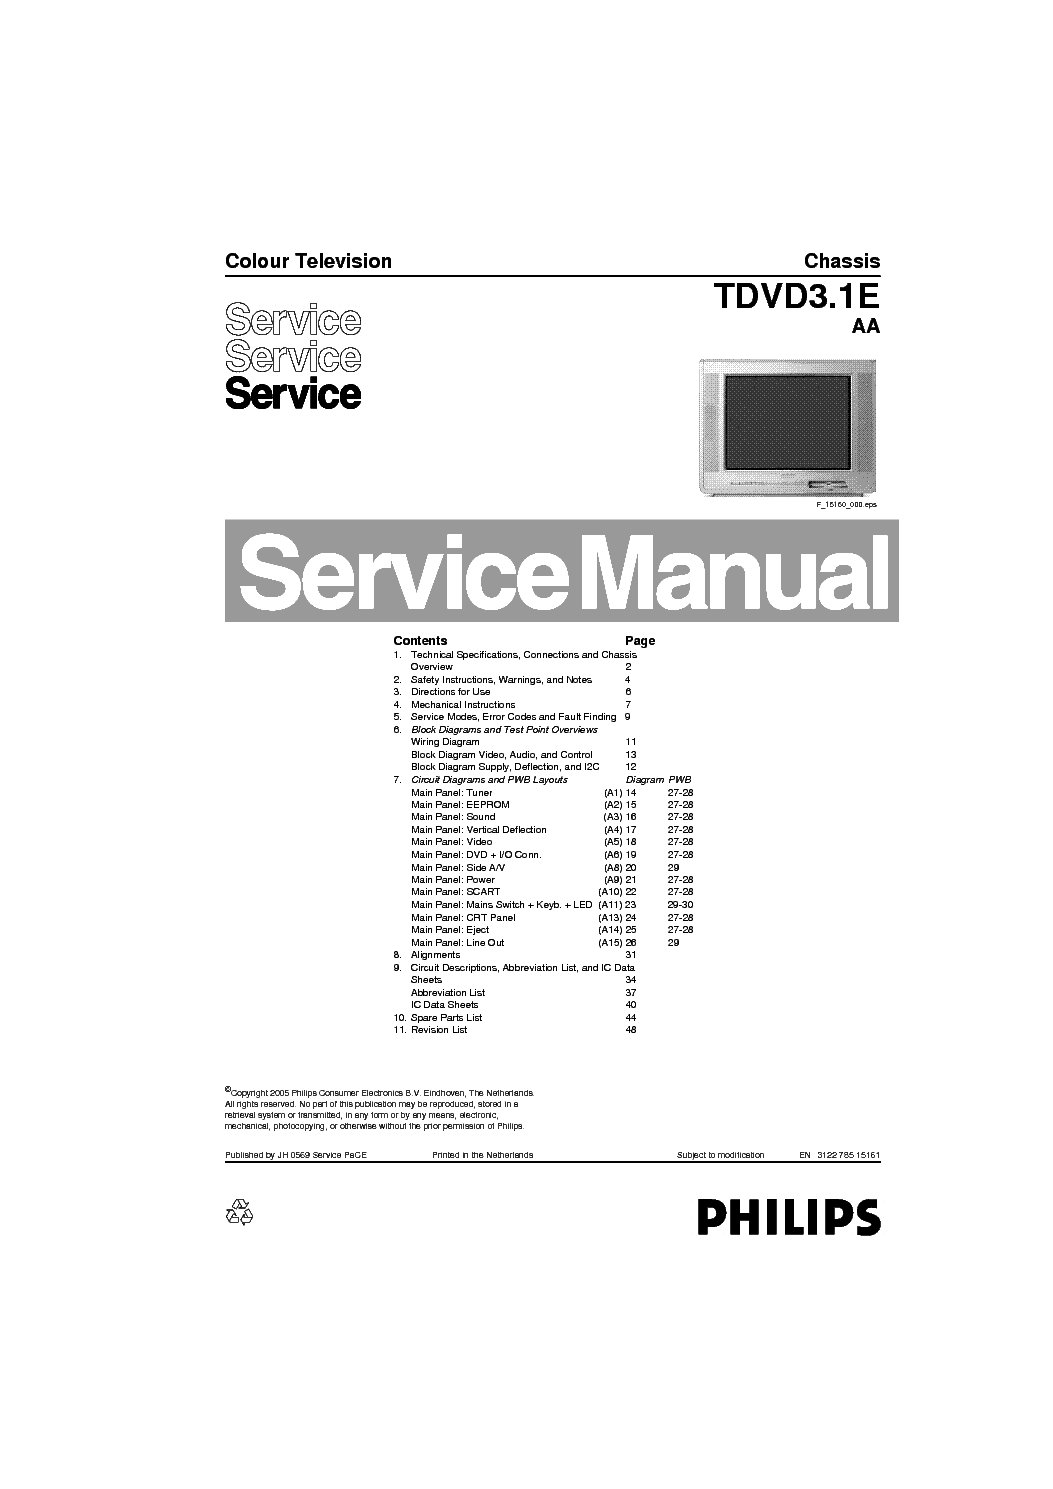 PHILIPS CHASSIS TVD 3 1E AA service manual (1st page)